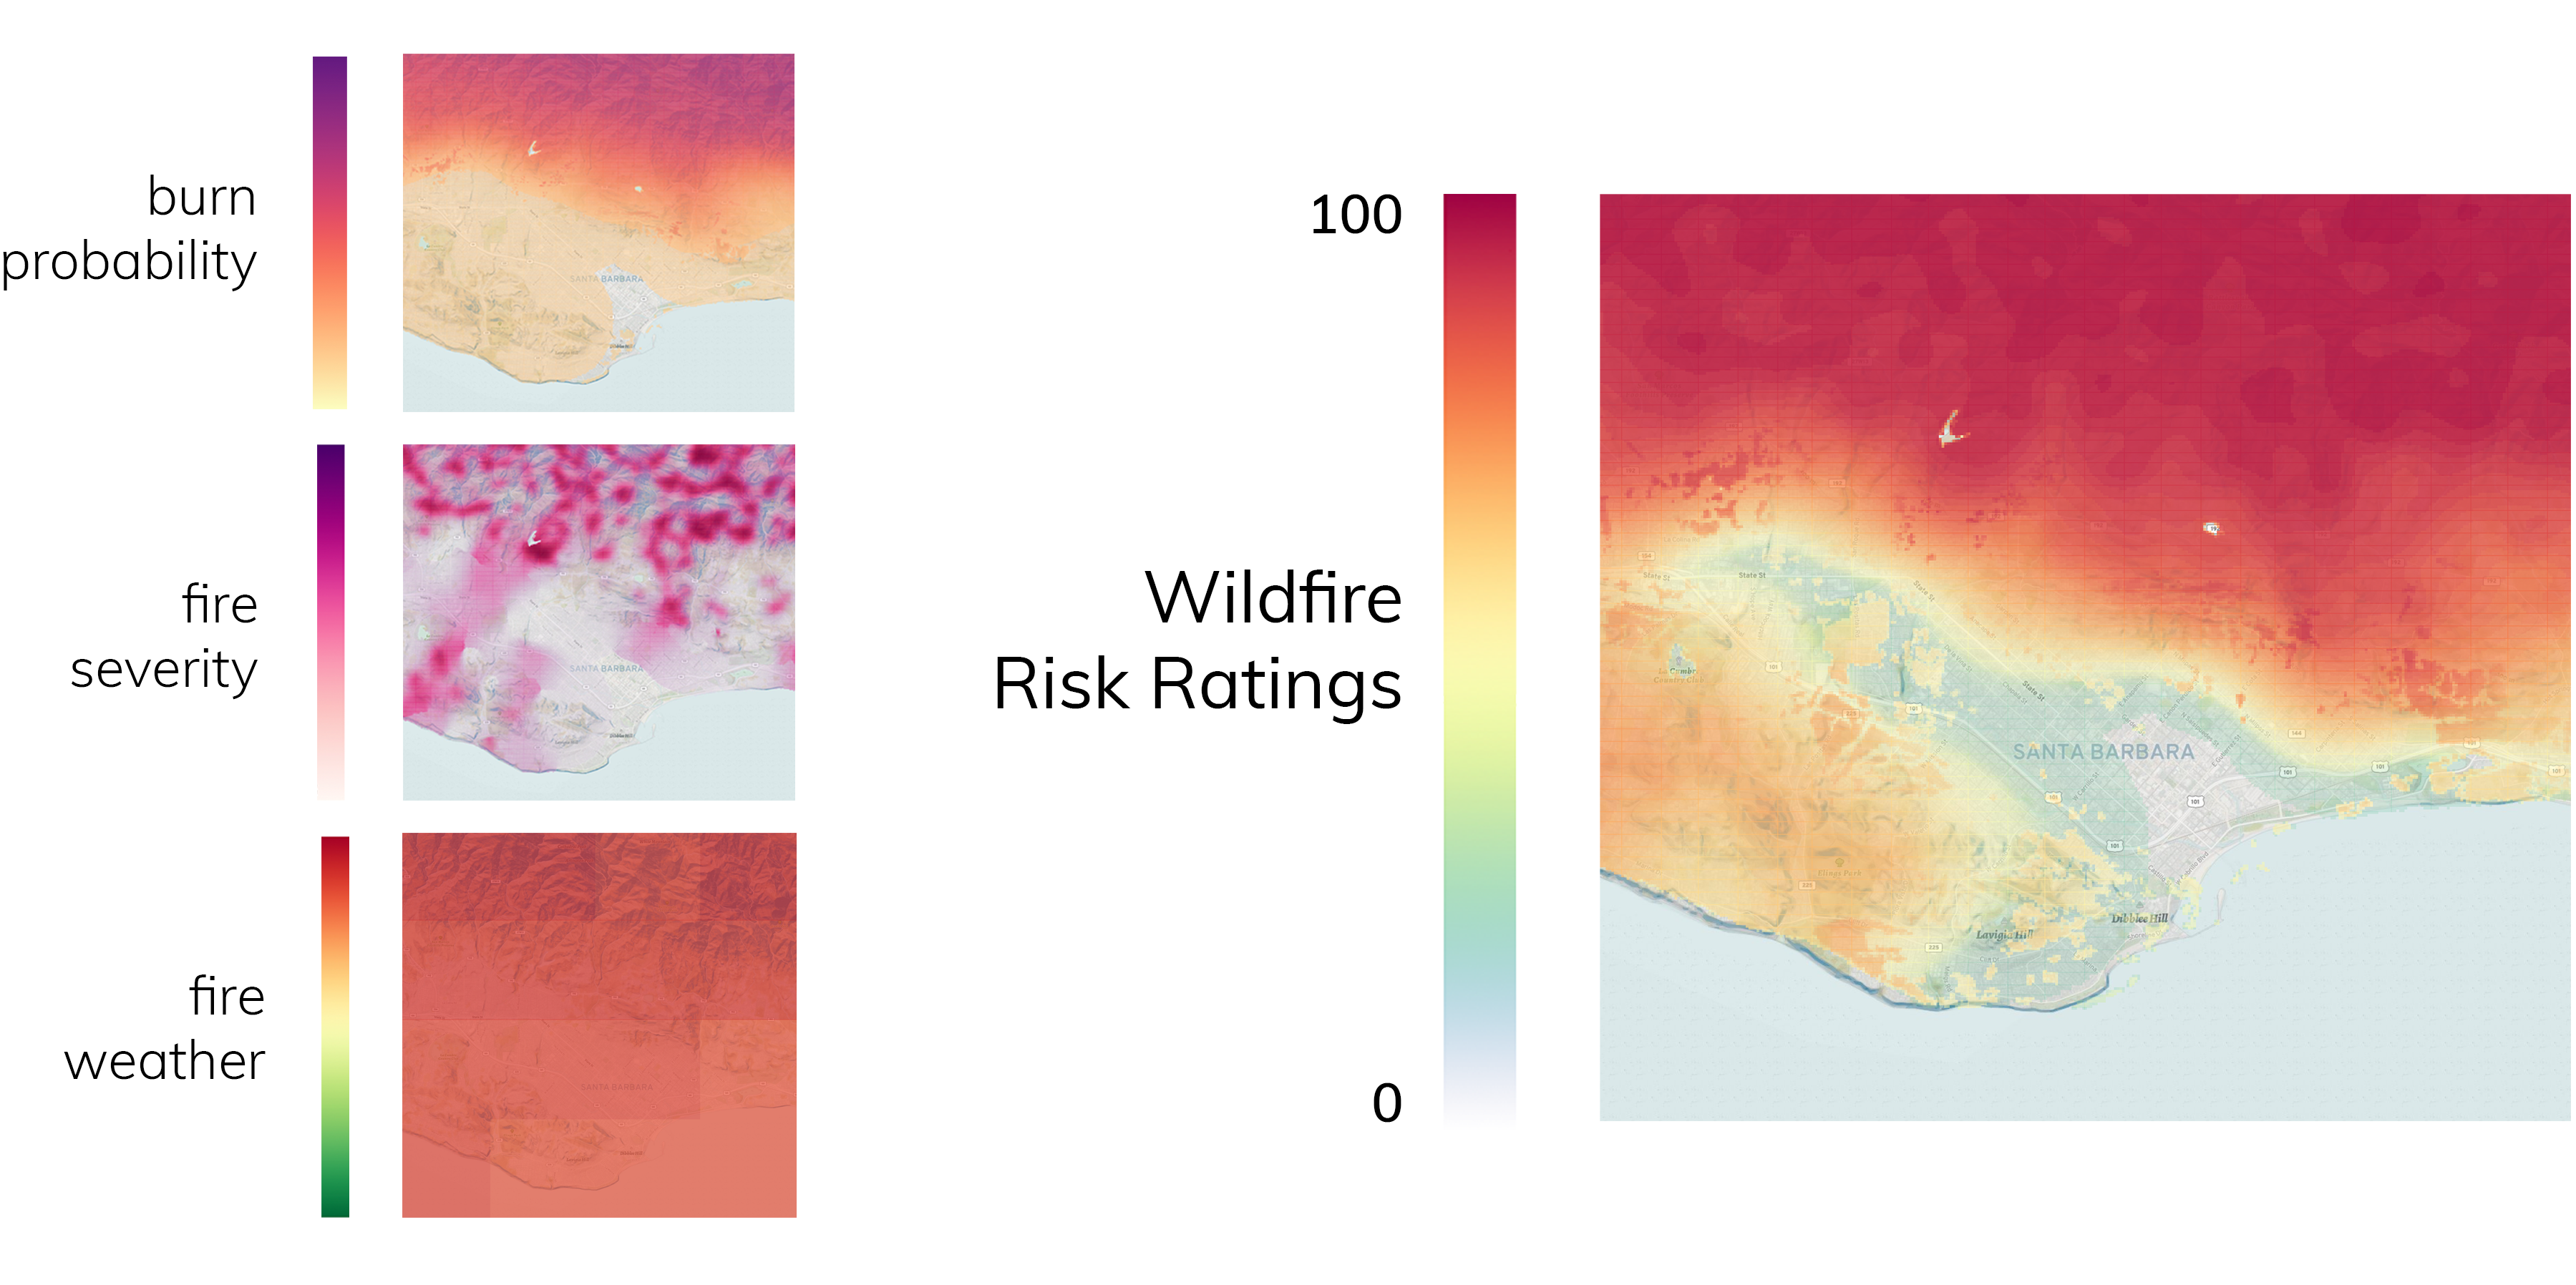 burn probability, fire severity, and fire weather contribute to the wildfire risk ratings.